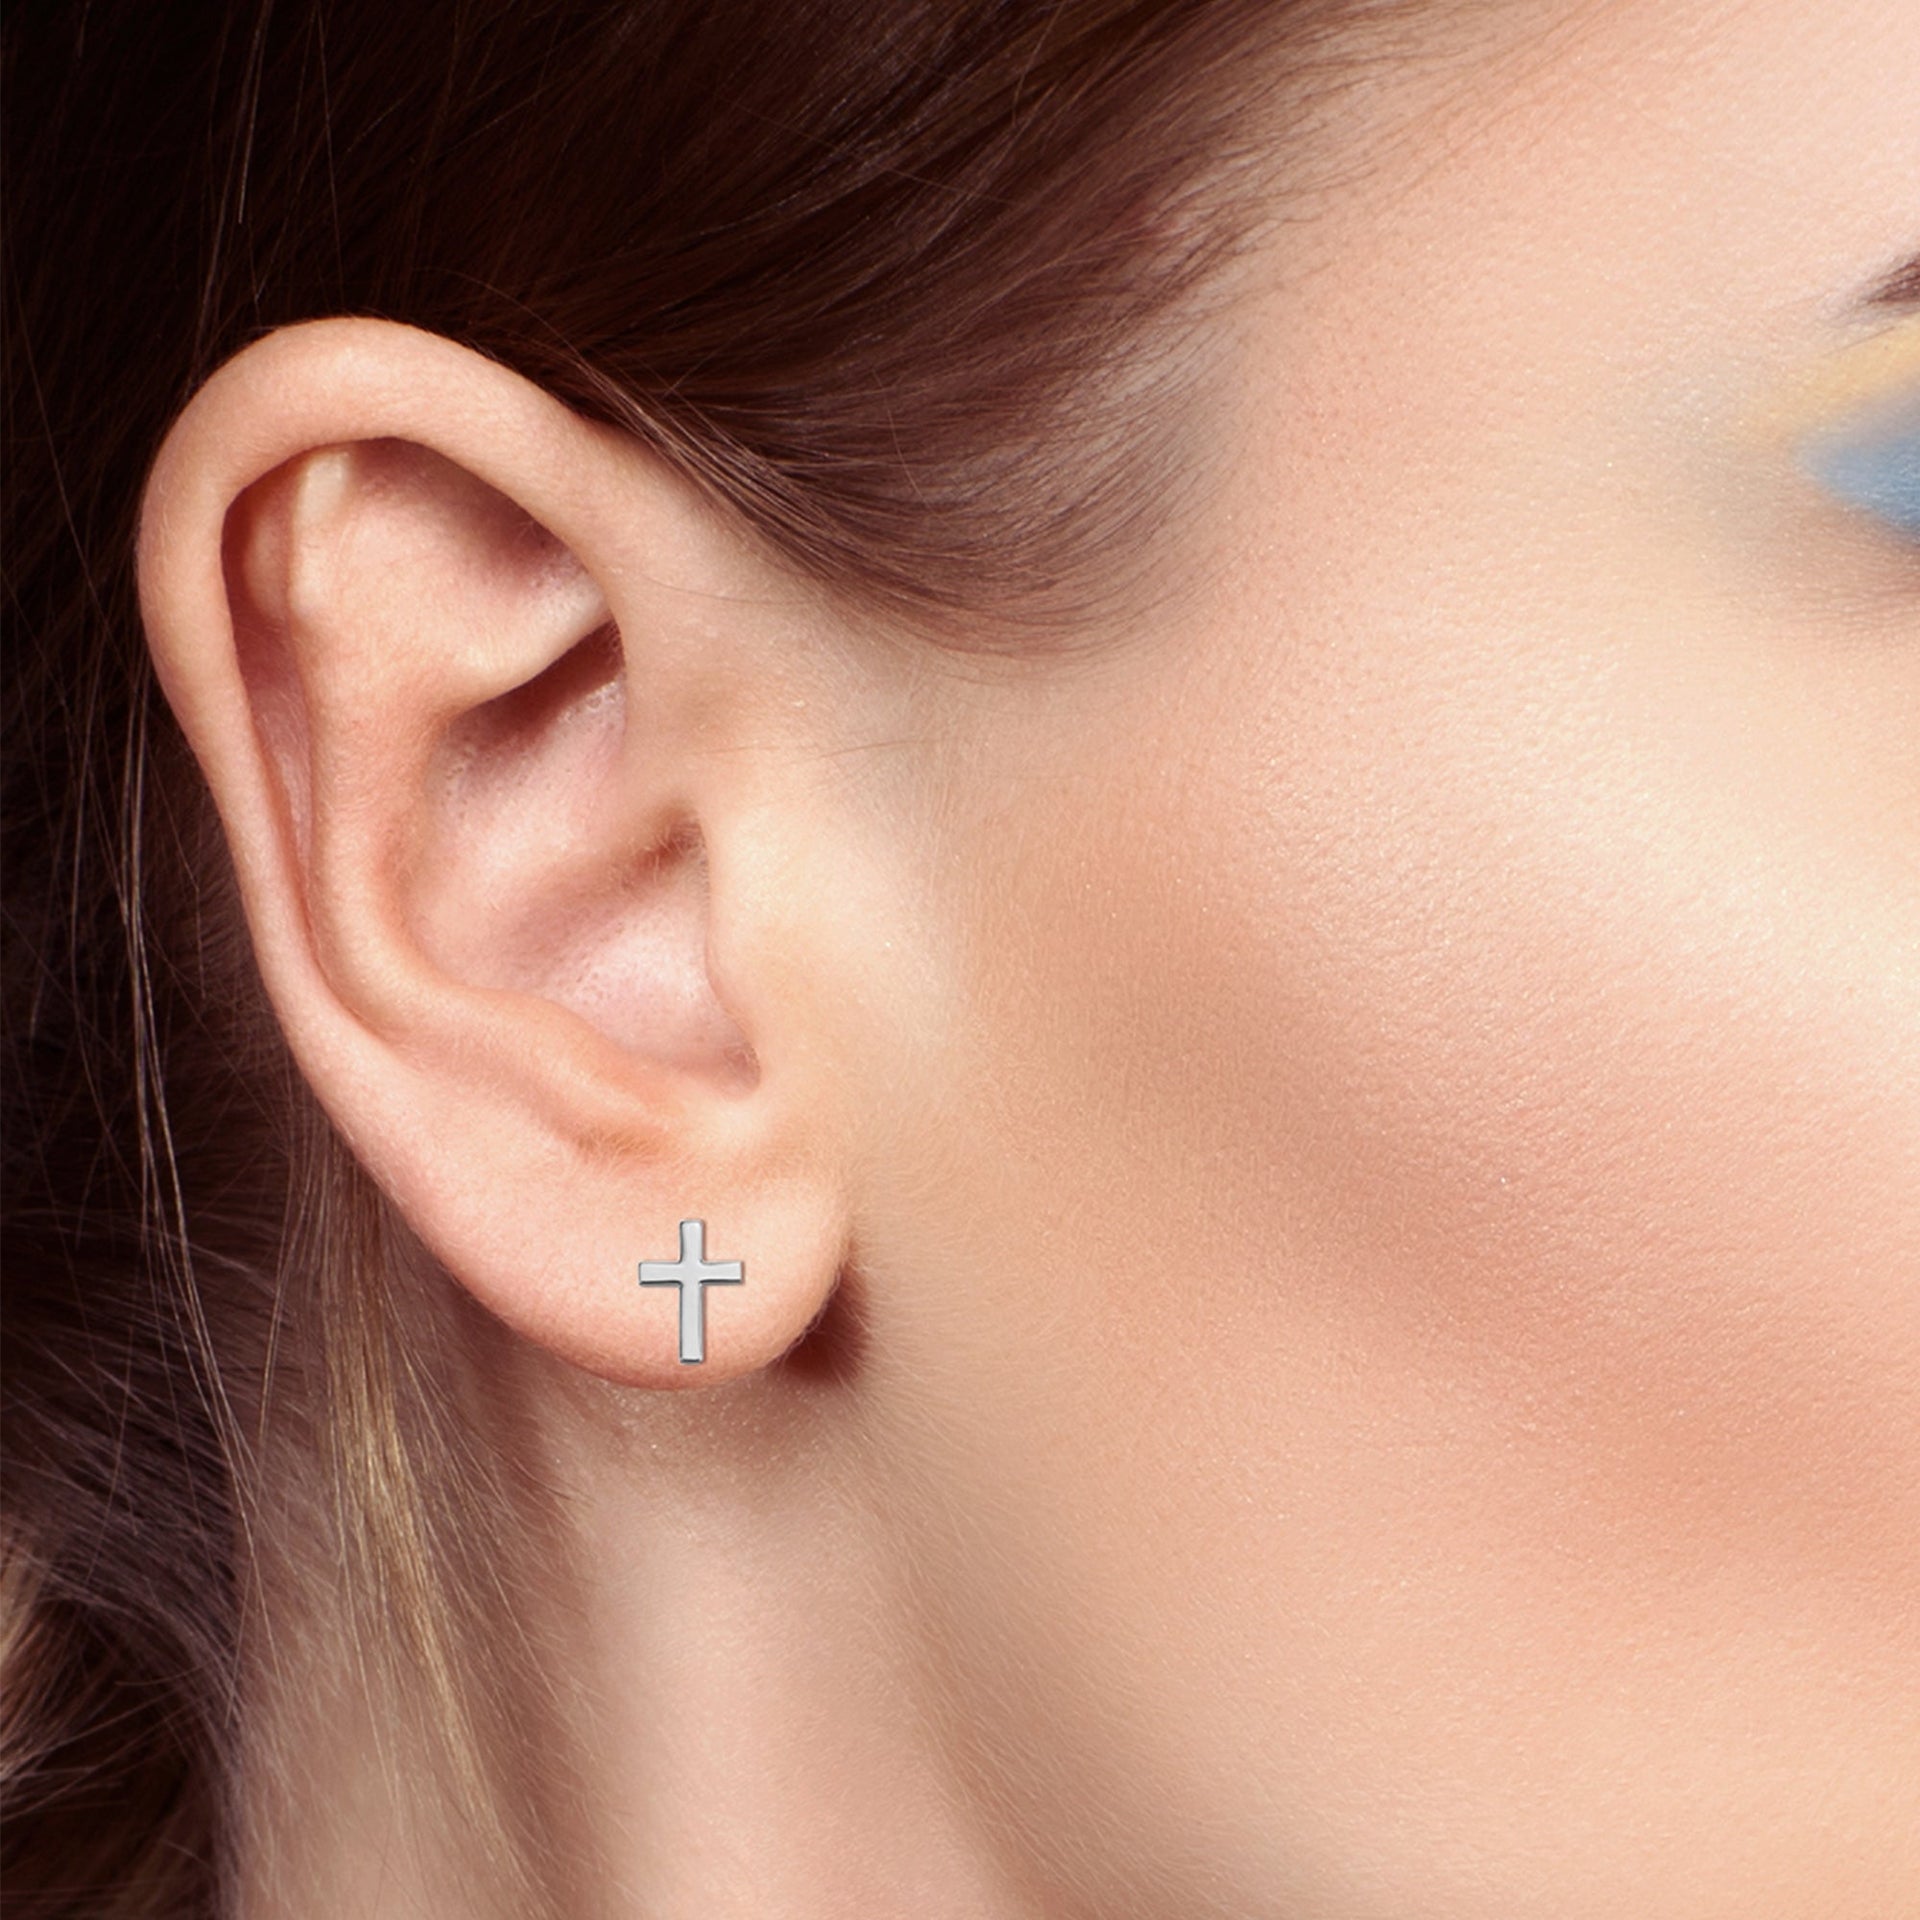 Ladies 925 Sterling Silver Cross Stud Earrings, Available in 2 Different Sizes - US Jewels